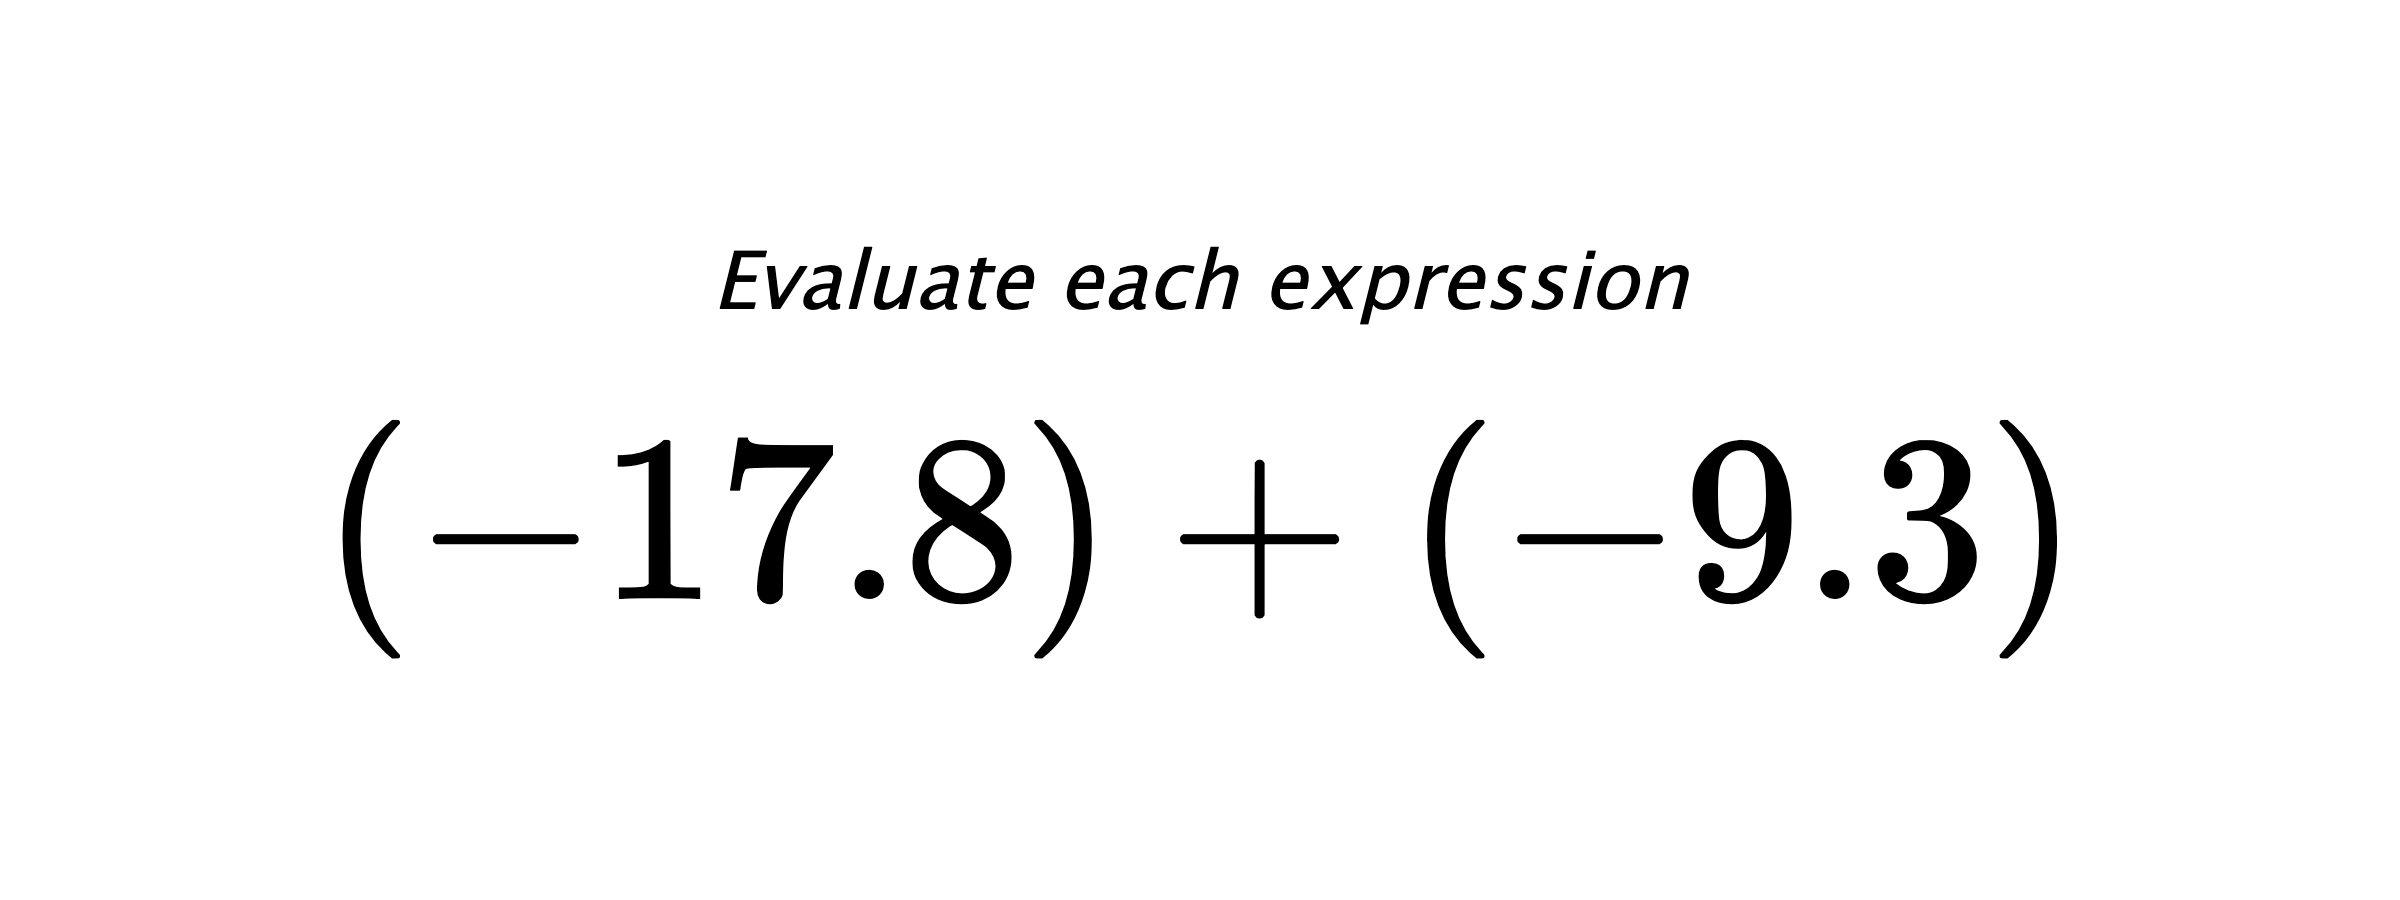 Evaluate each expression $ (-17.8)+(-9.3) $